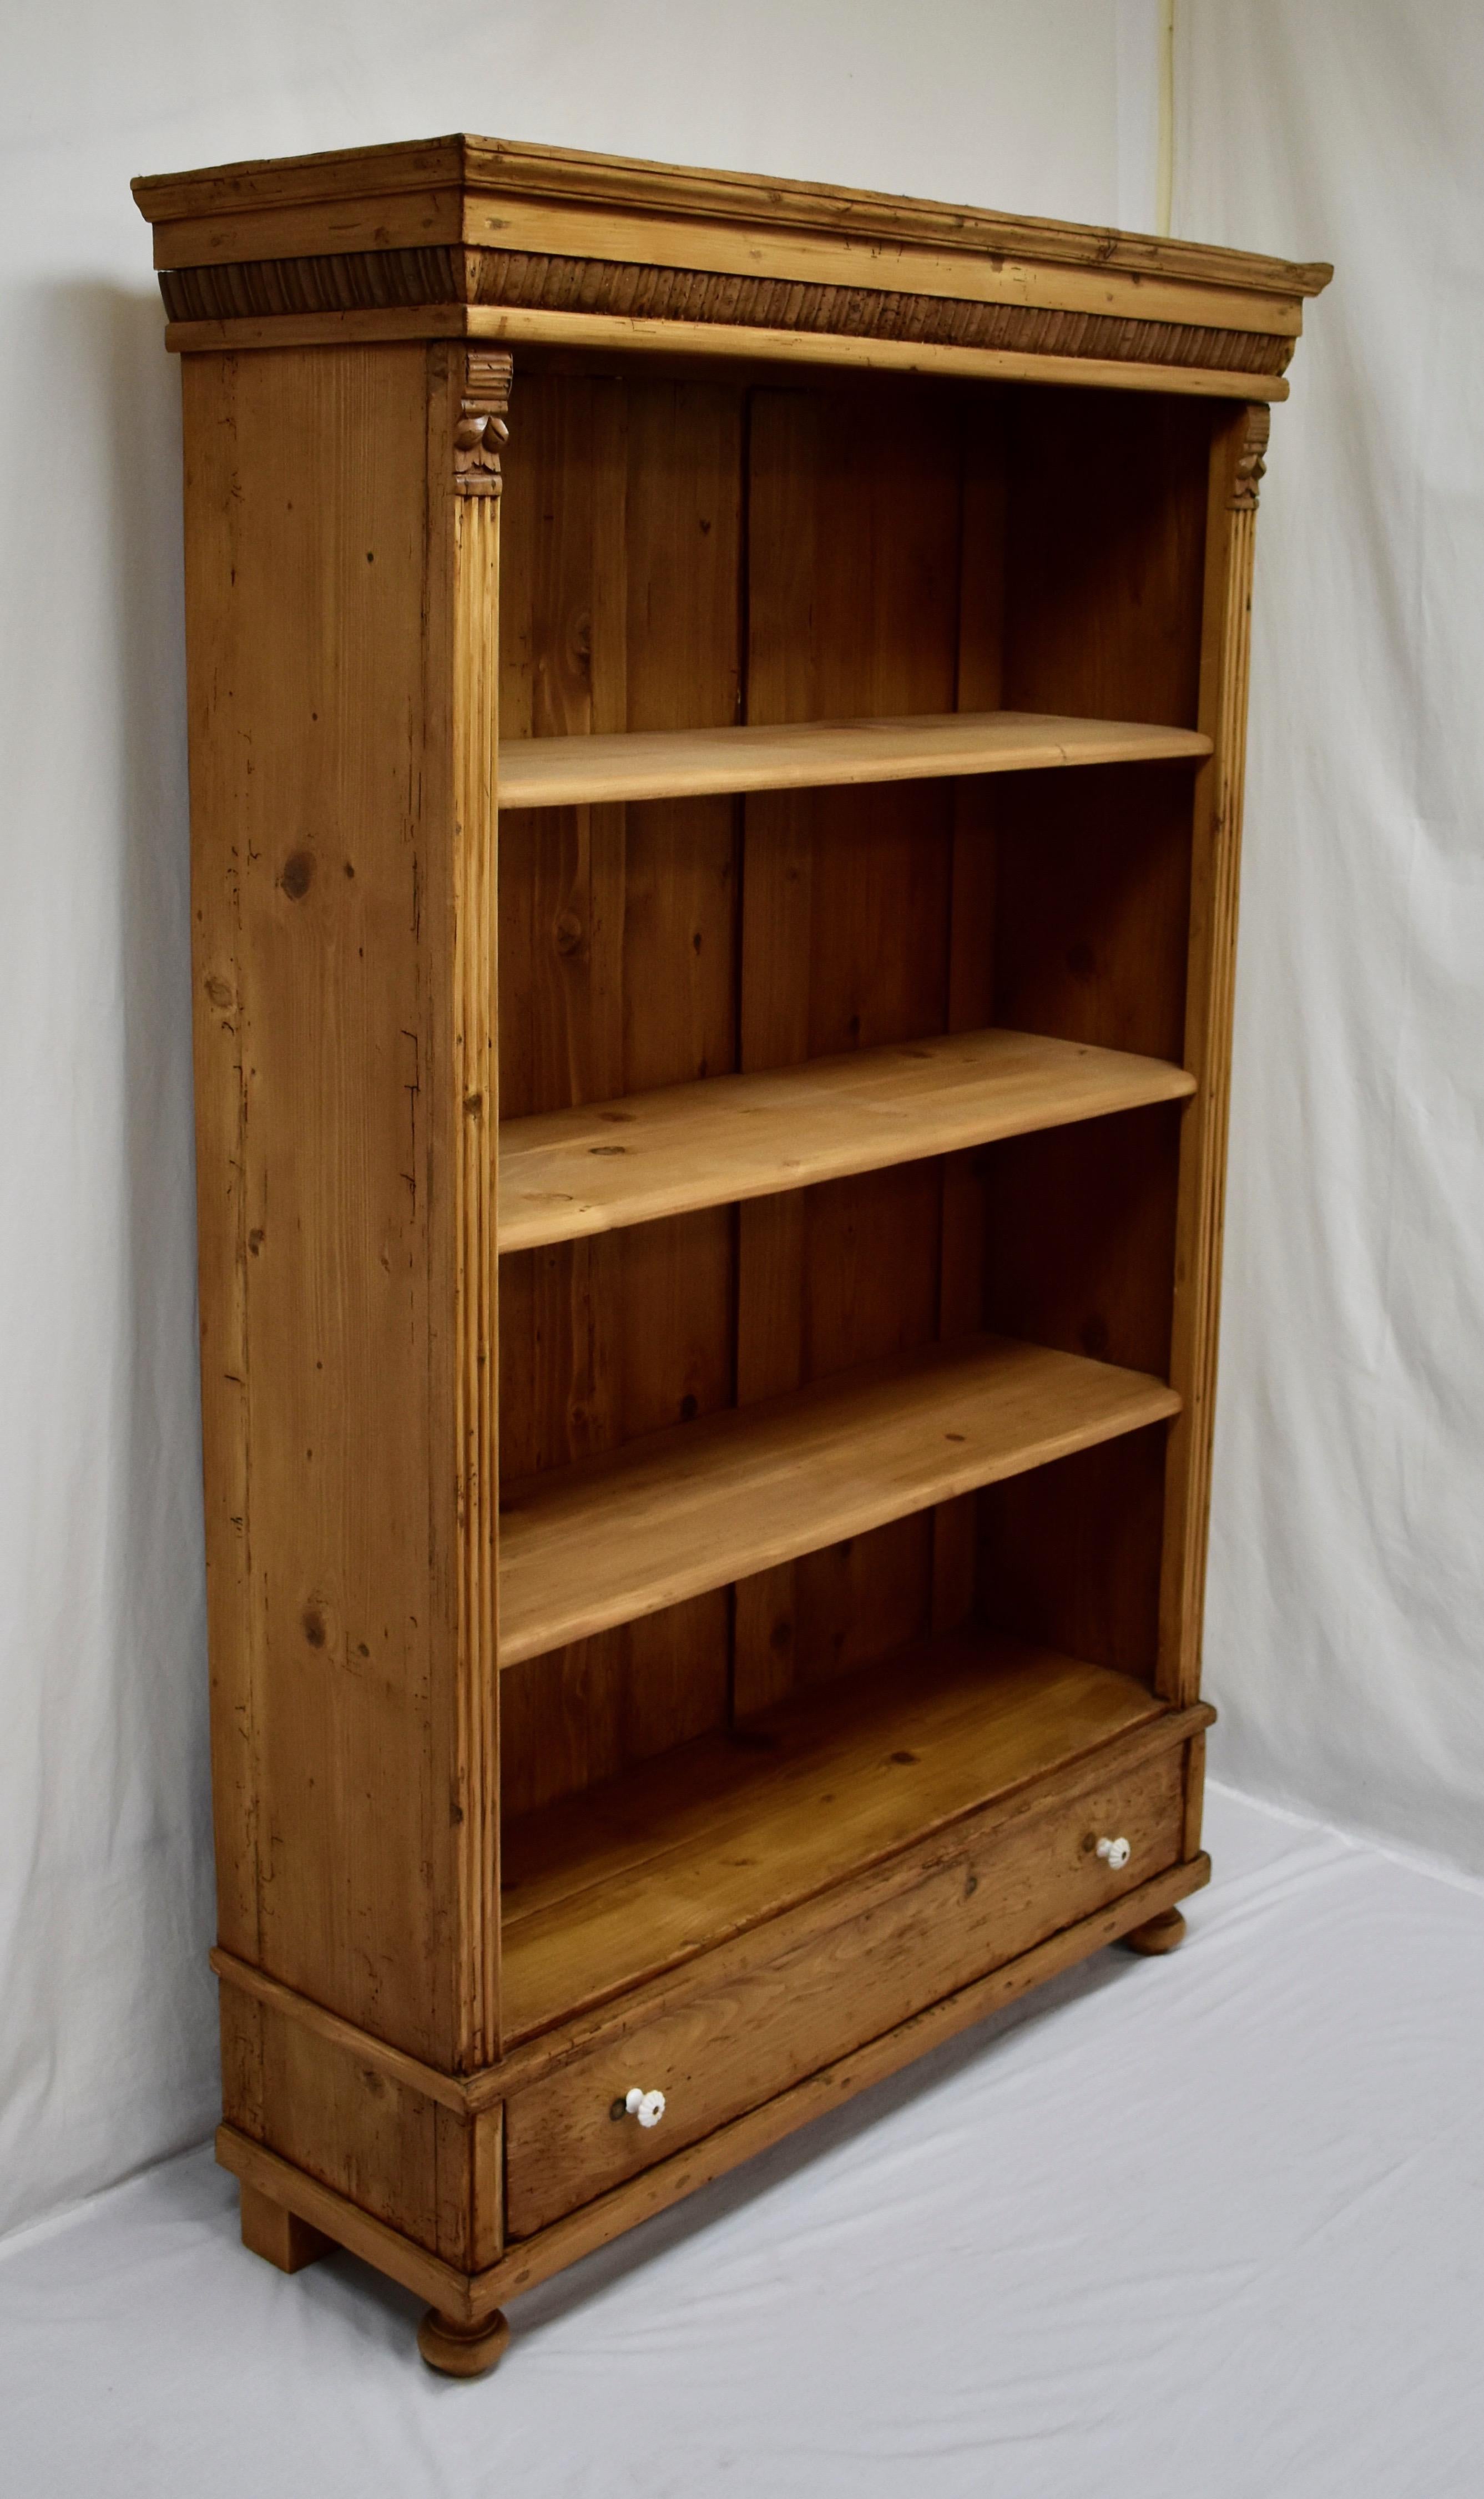 Antique pine bookcases are hard to find so the shell of this piece was provided by a vintage pine armoire, in this case one of considerable character, that had lost its doors, With one board width removed from the sides and the original backboards,